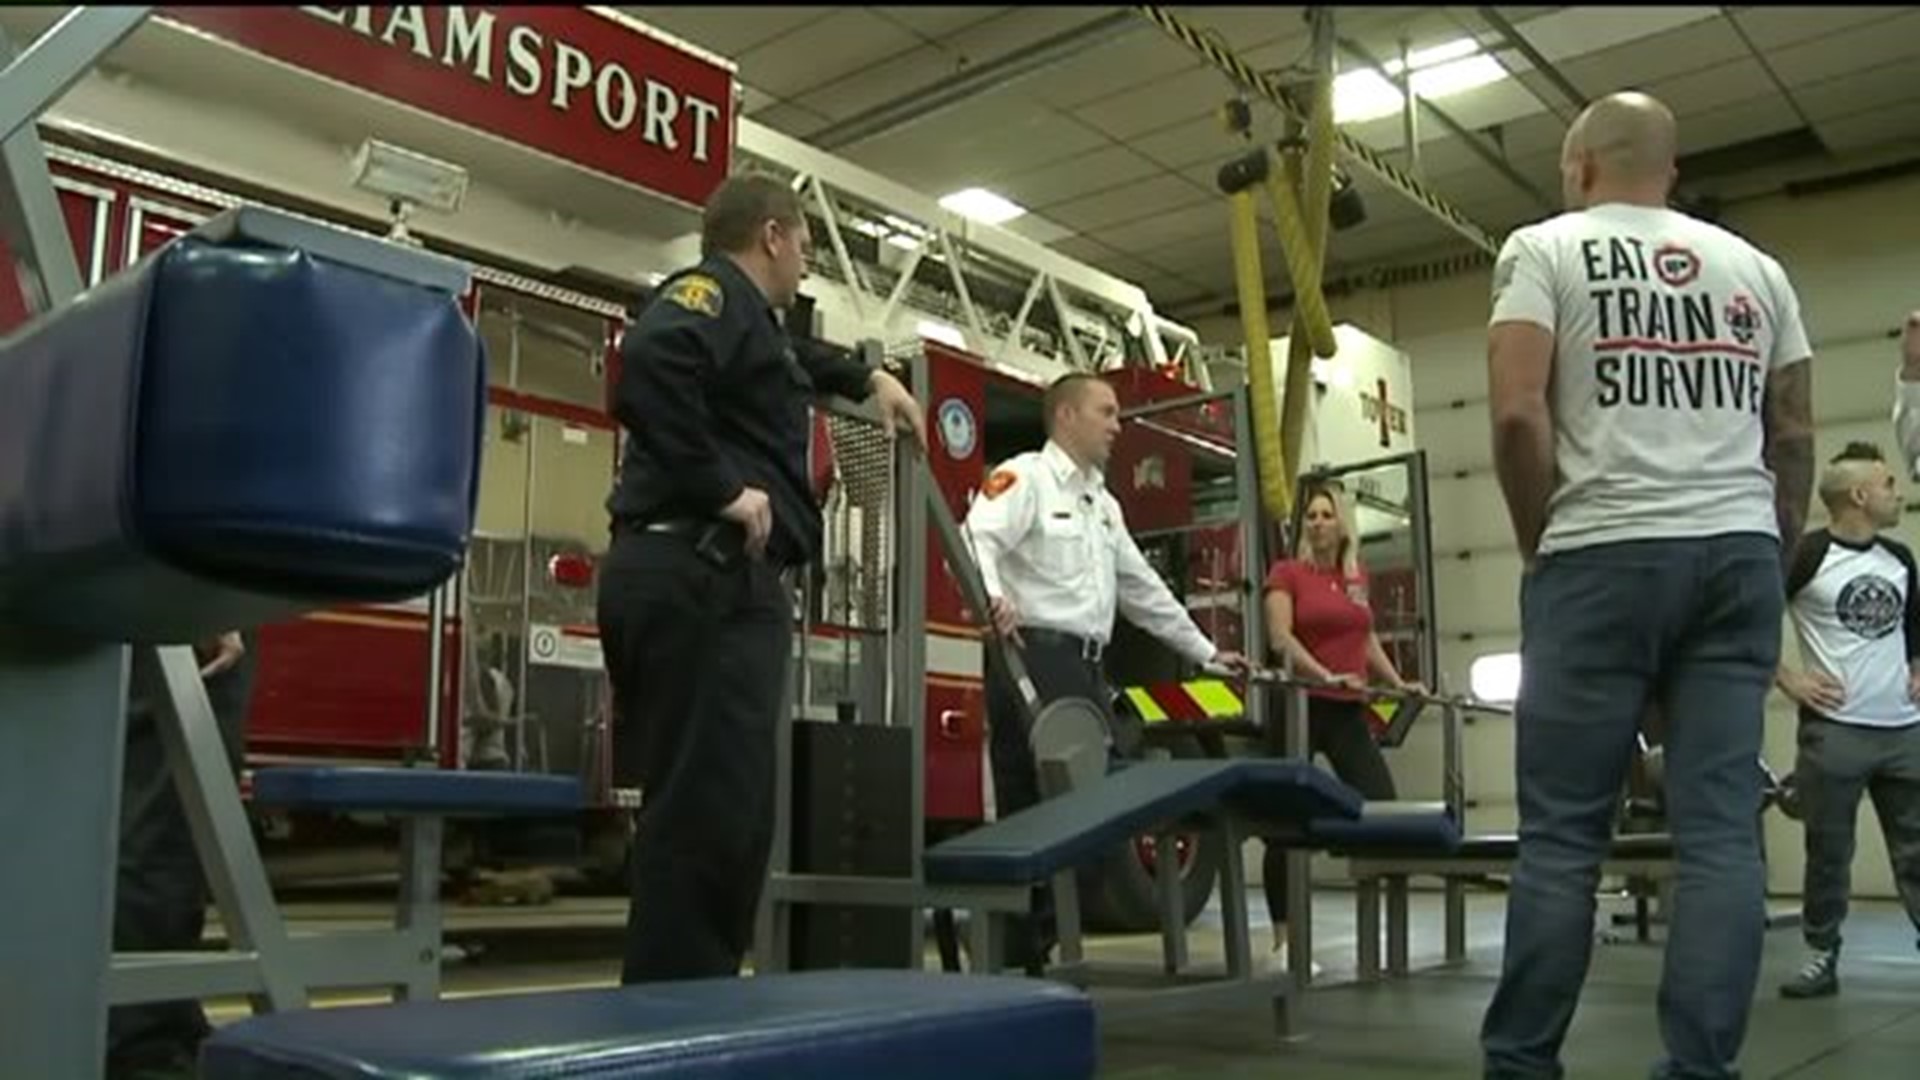 Fire Department Works to Live Healthy Lifestyles